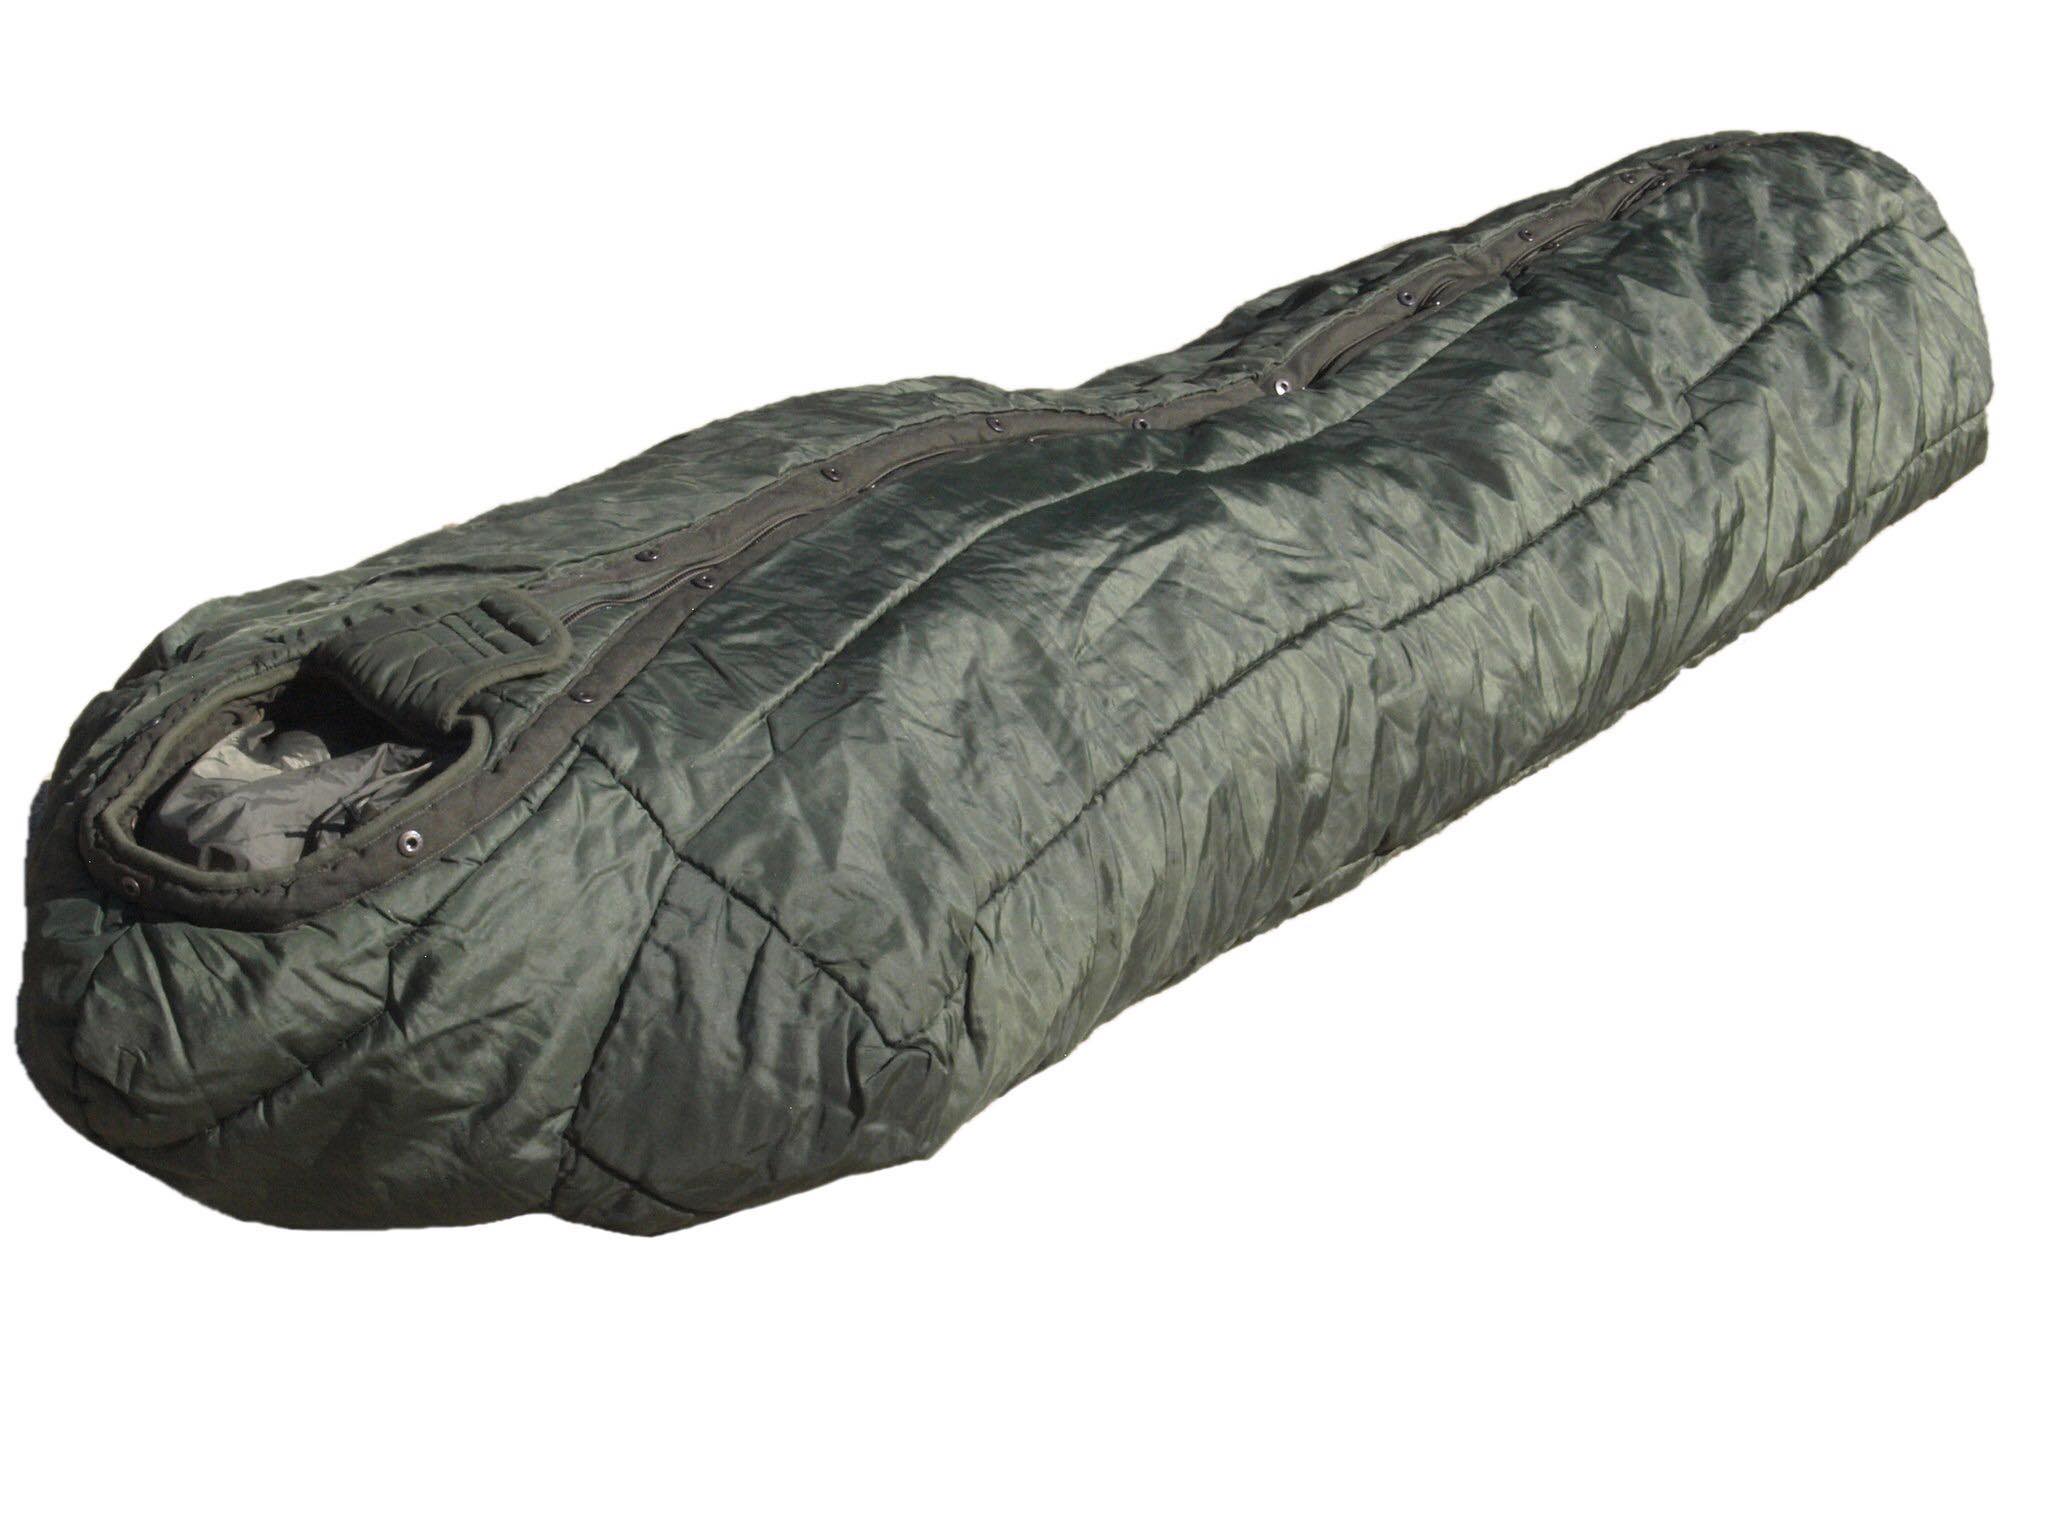 Share more than 84 military surplus sleeping bags best - in.duhocakina